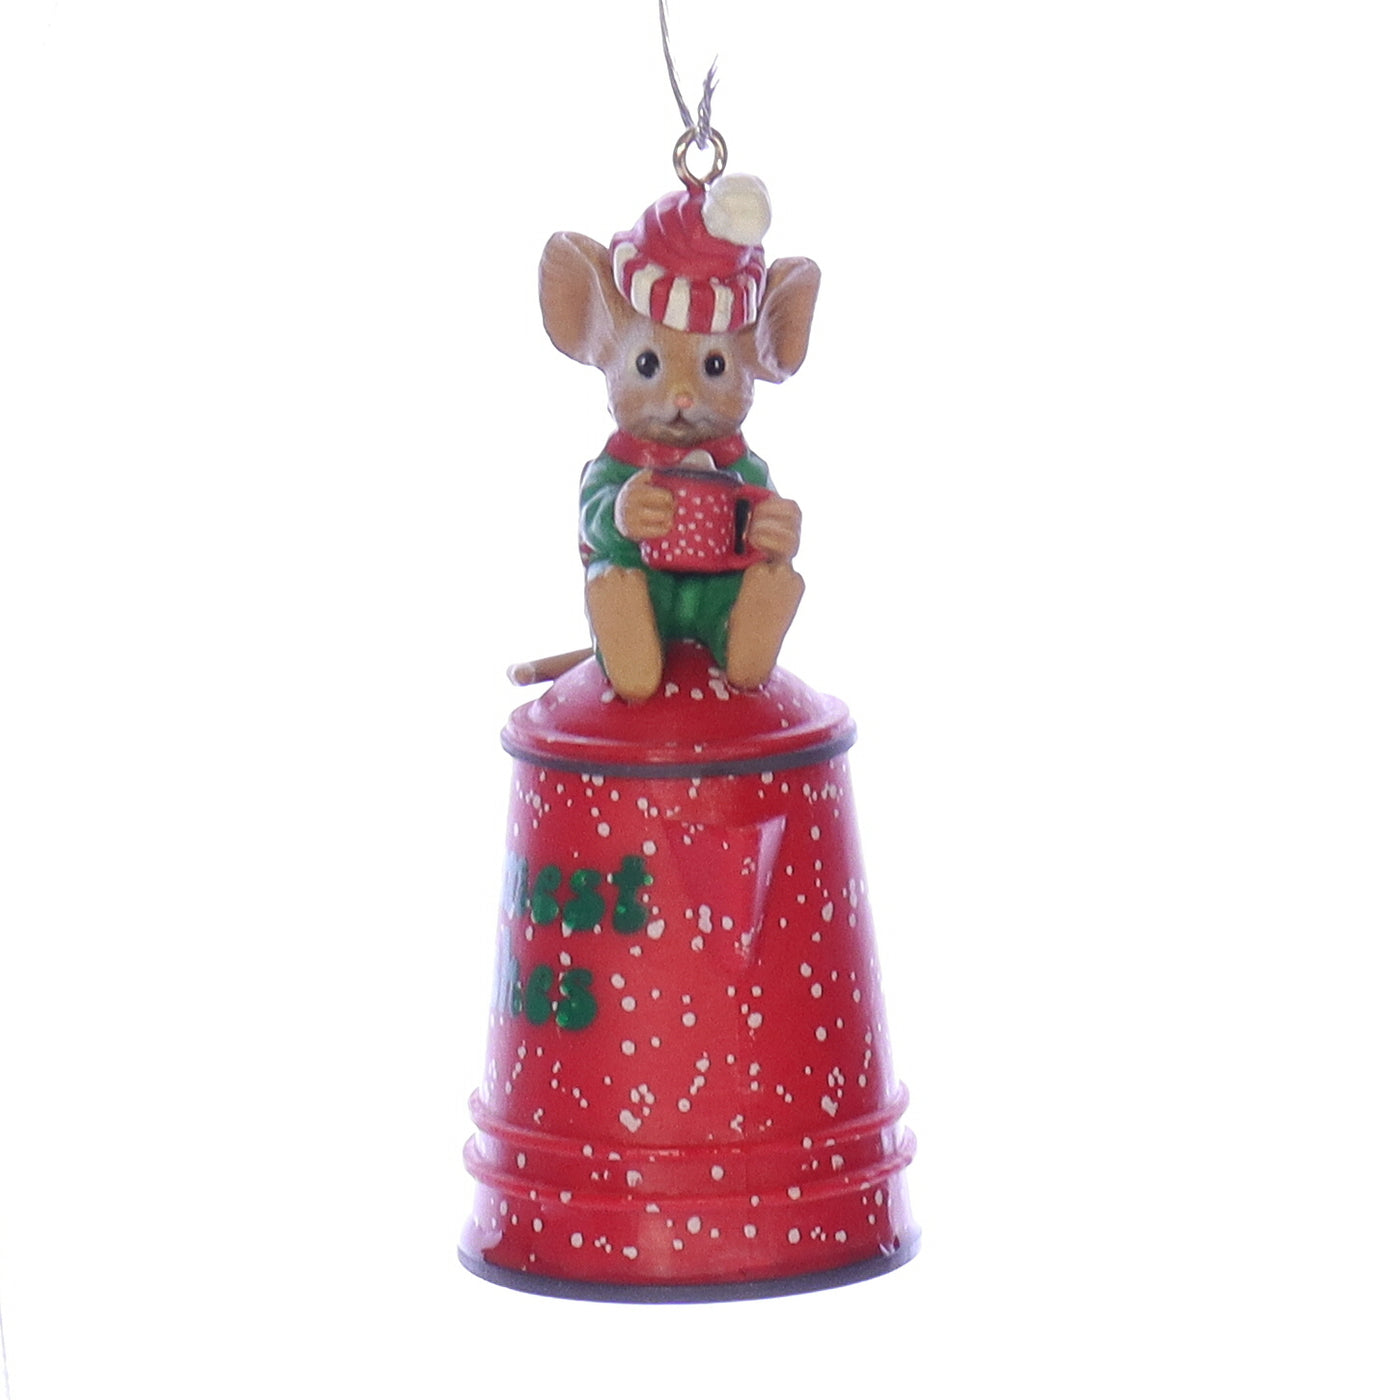 Enesco_Treasury_of_Christmas_Ornaments_564974_Brewing_Warm_Wishes_Mouse_Ornament_1991 Front View